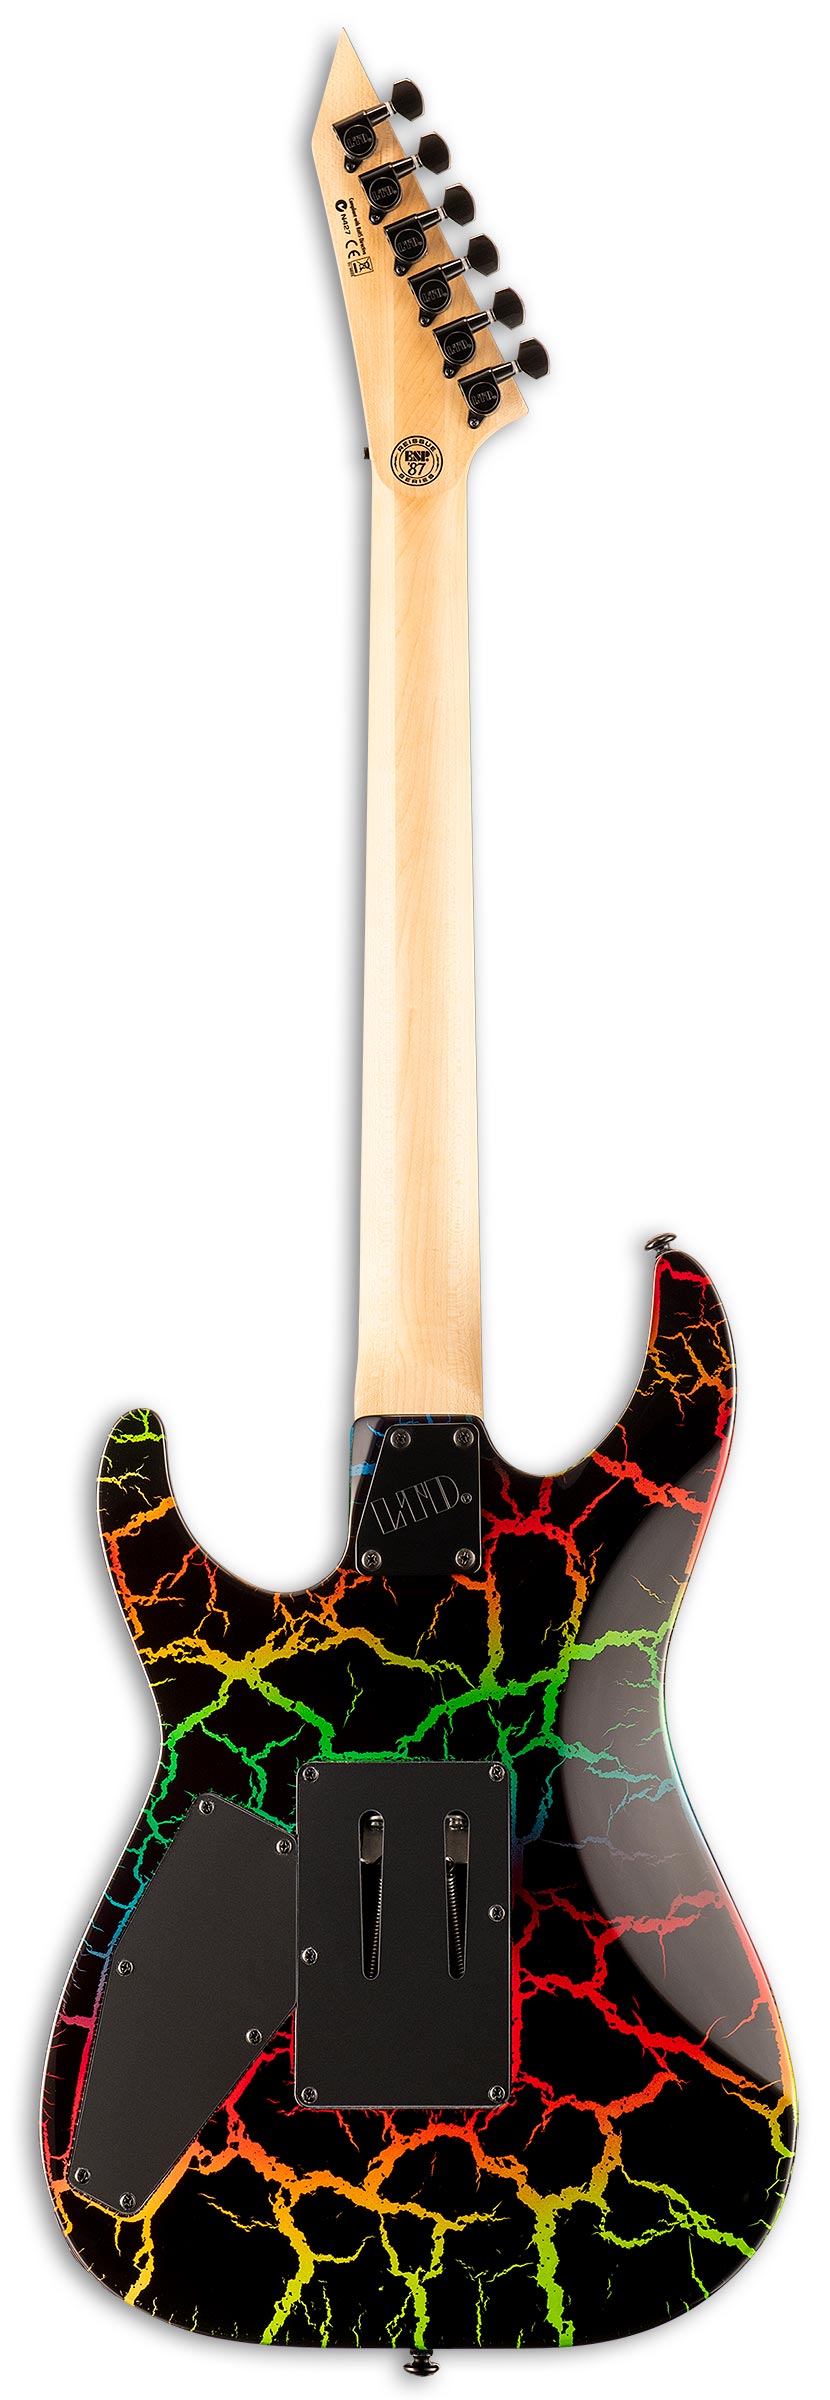 ESP LTD '87 Series Limited Edition Mirage Deluxe '87 - Rainbow Crackle